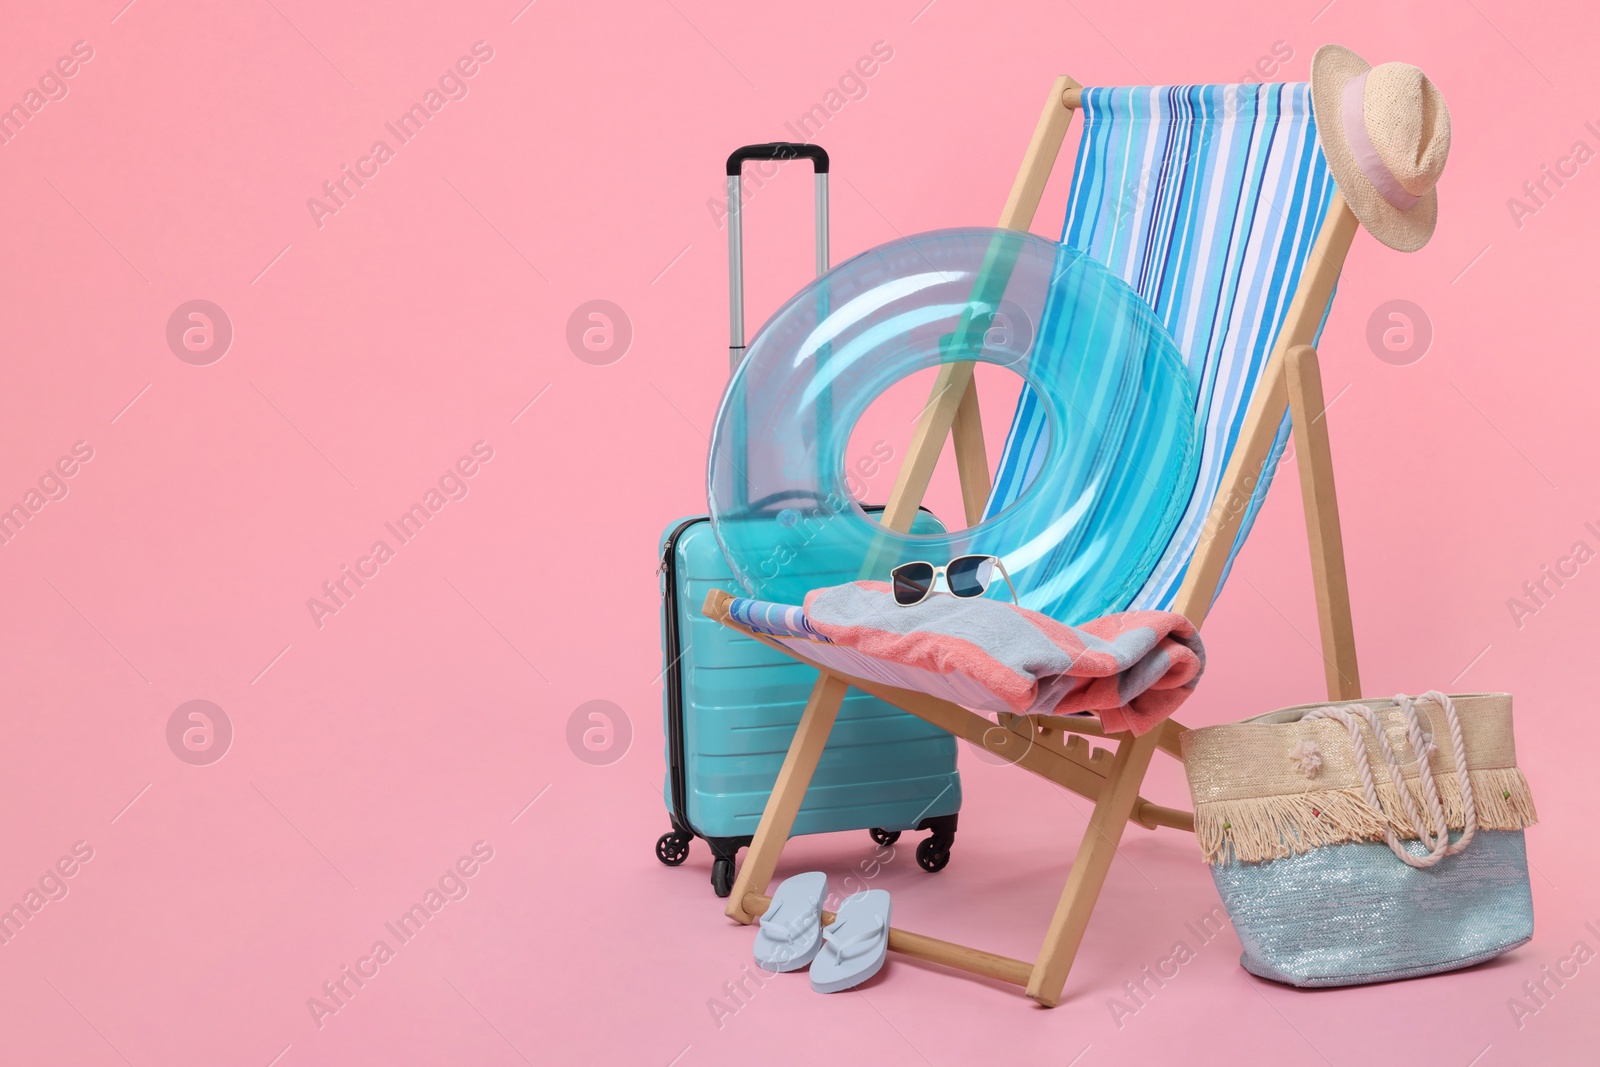 Photo of Deck chair, suitcase and beach accessories on pink background, space for text. Summer vacation